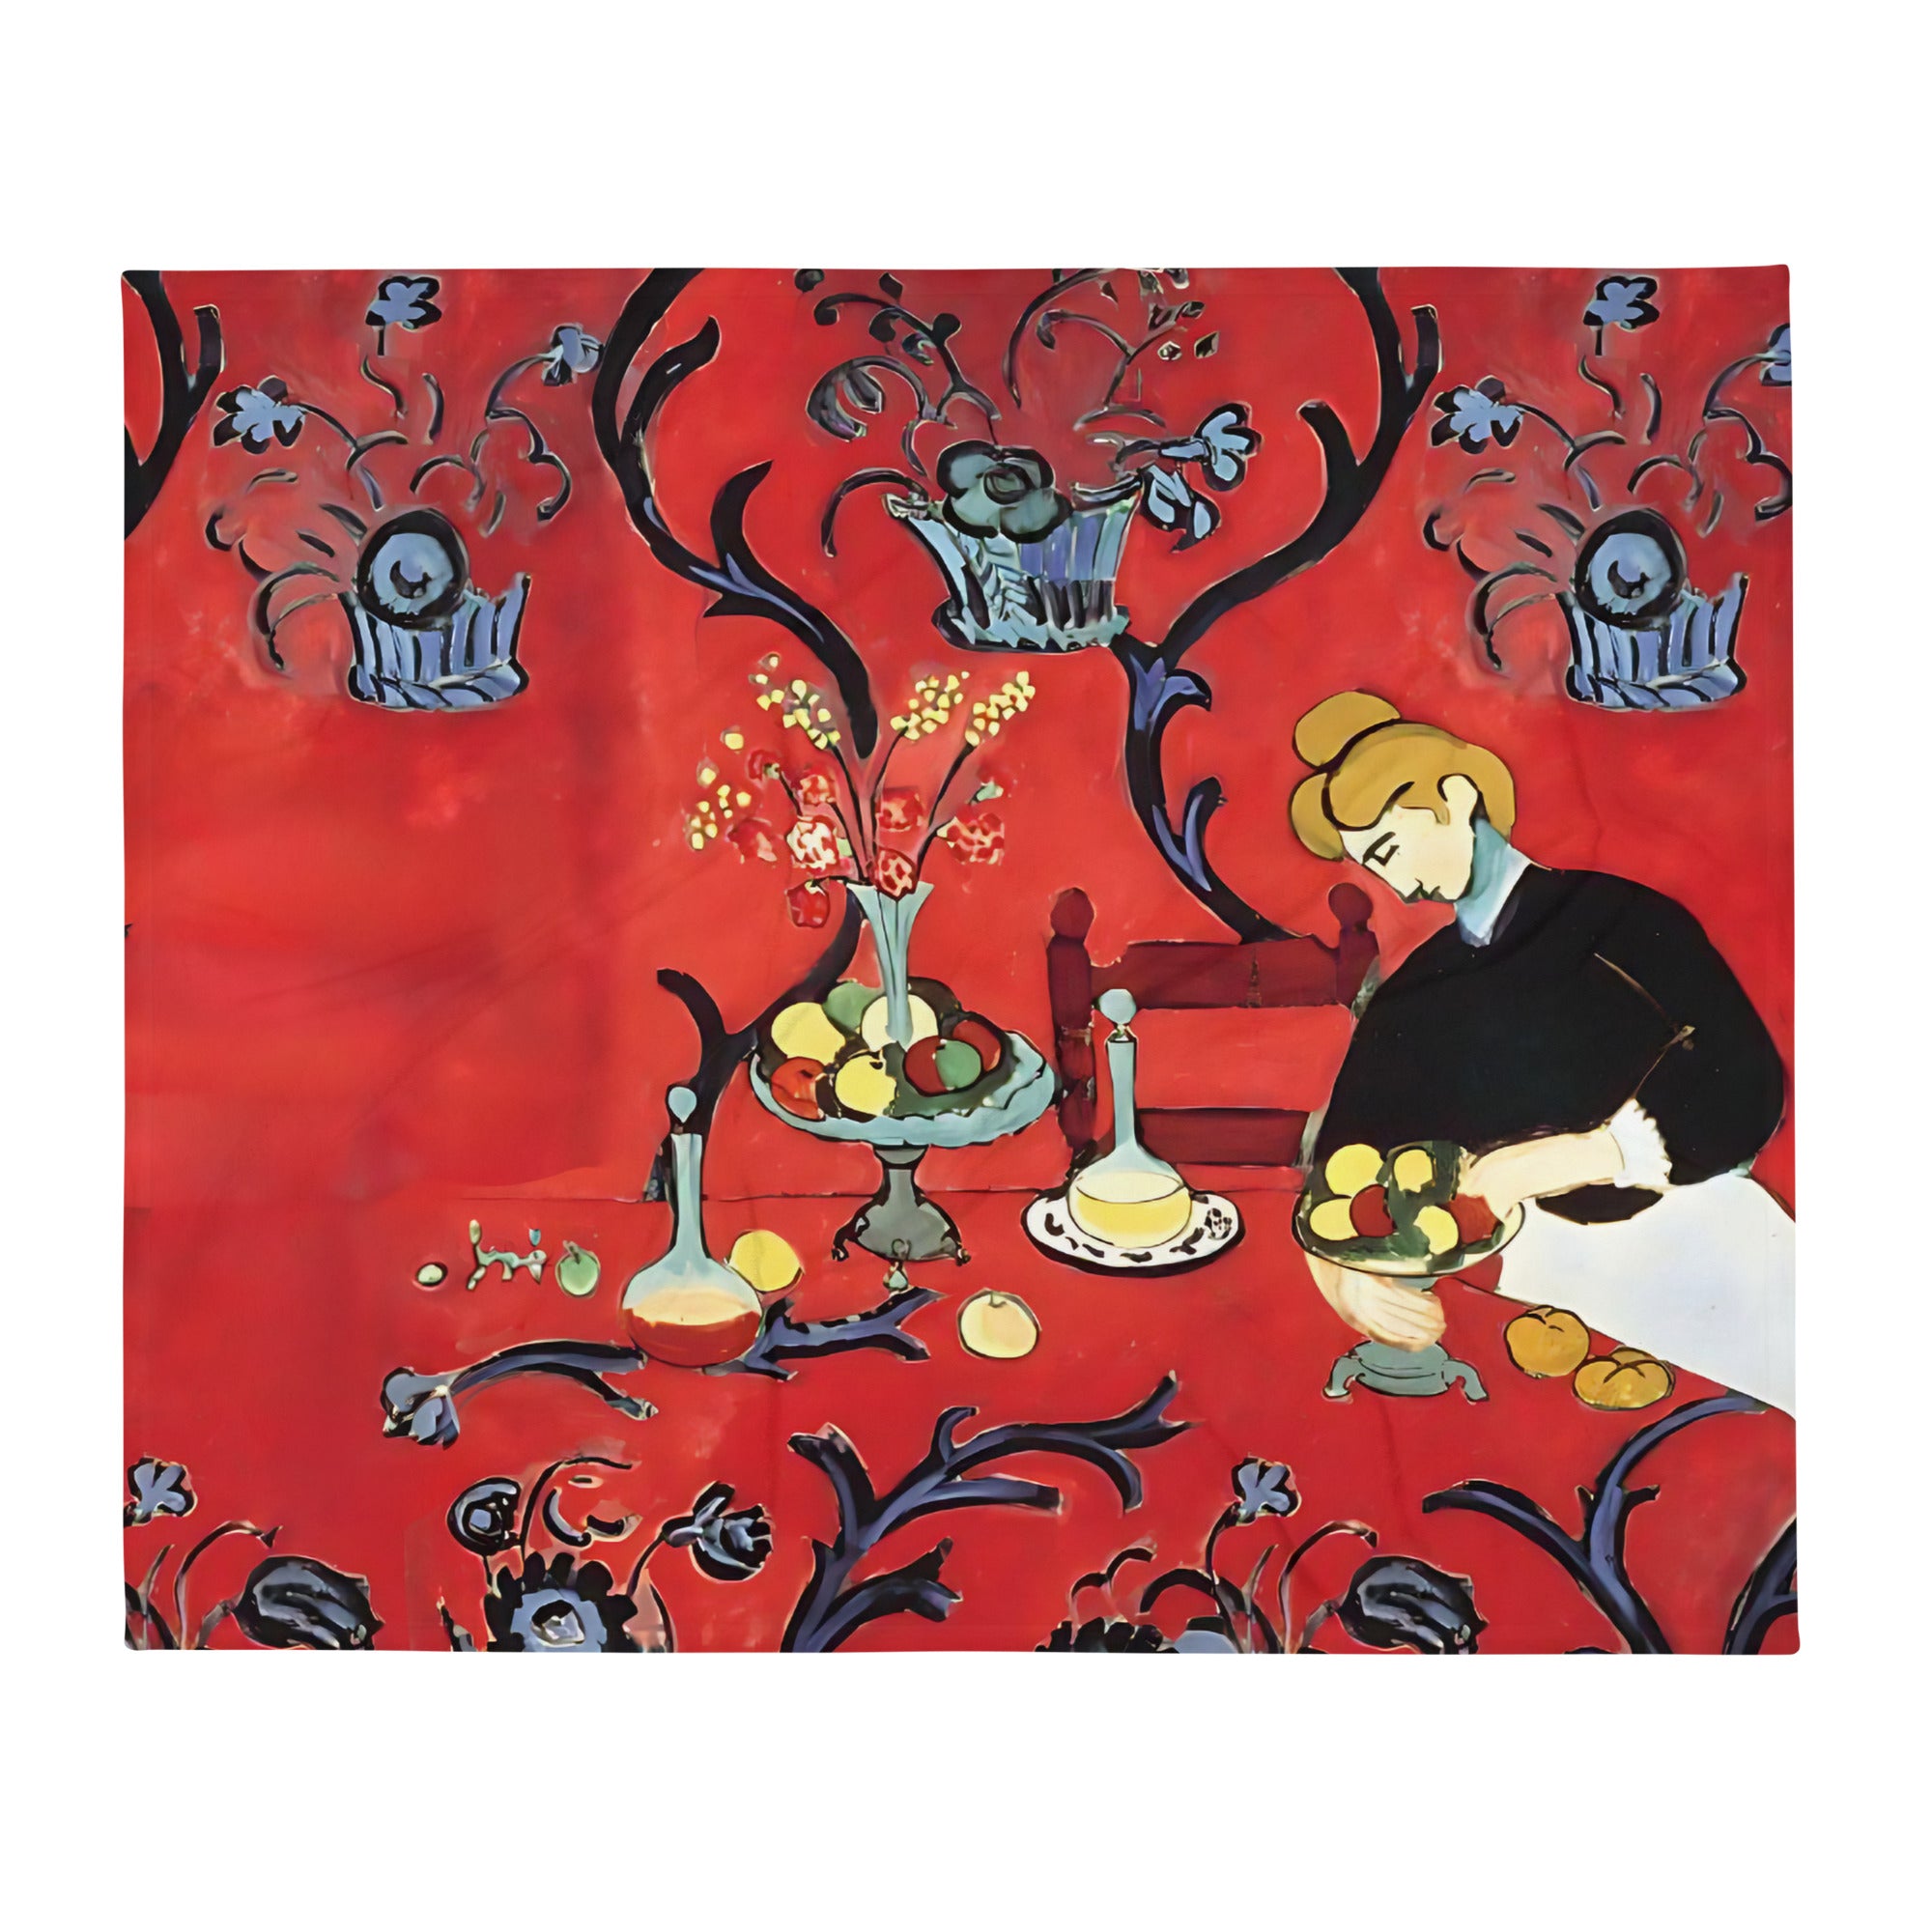 Henri Matisse ‘The Red Room’ Famous Painting Throw Blanket | Premium Art Throw